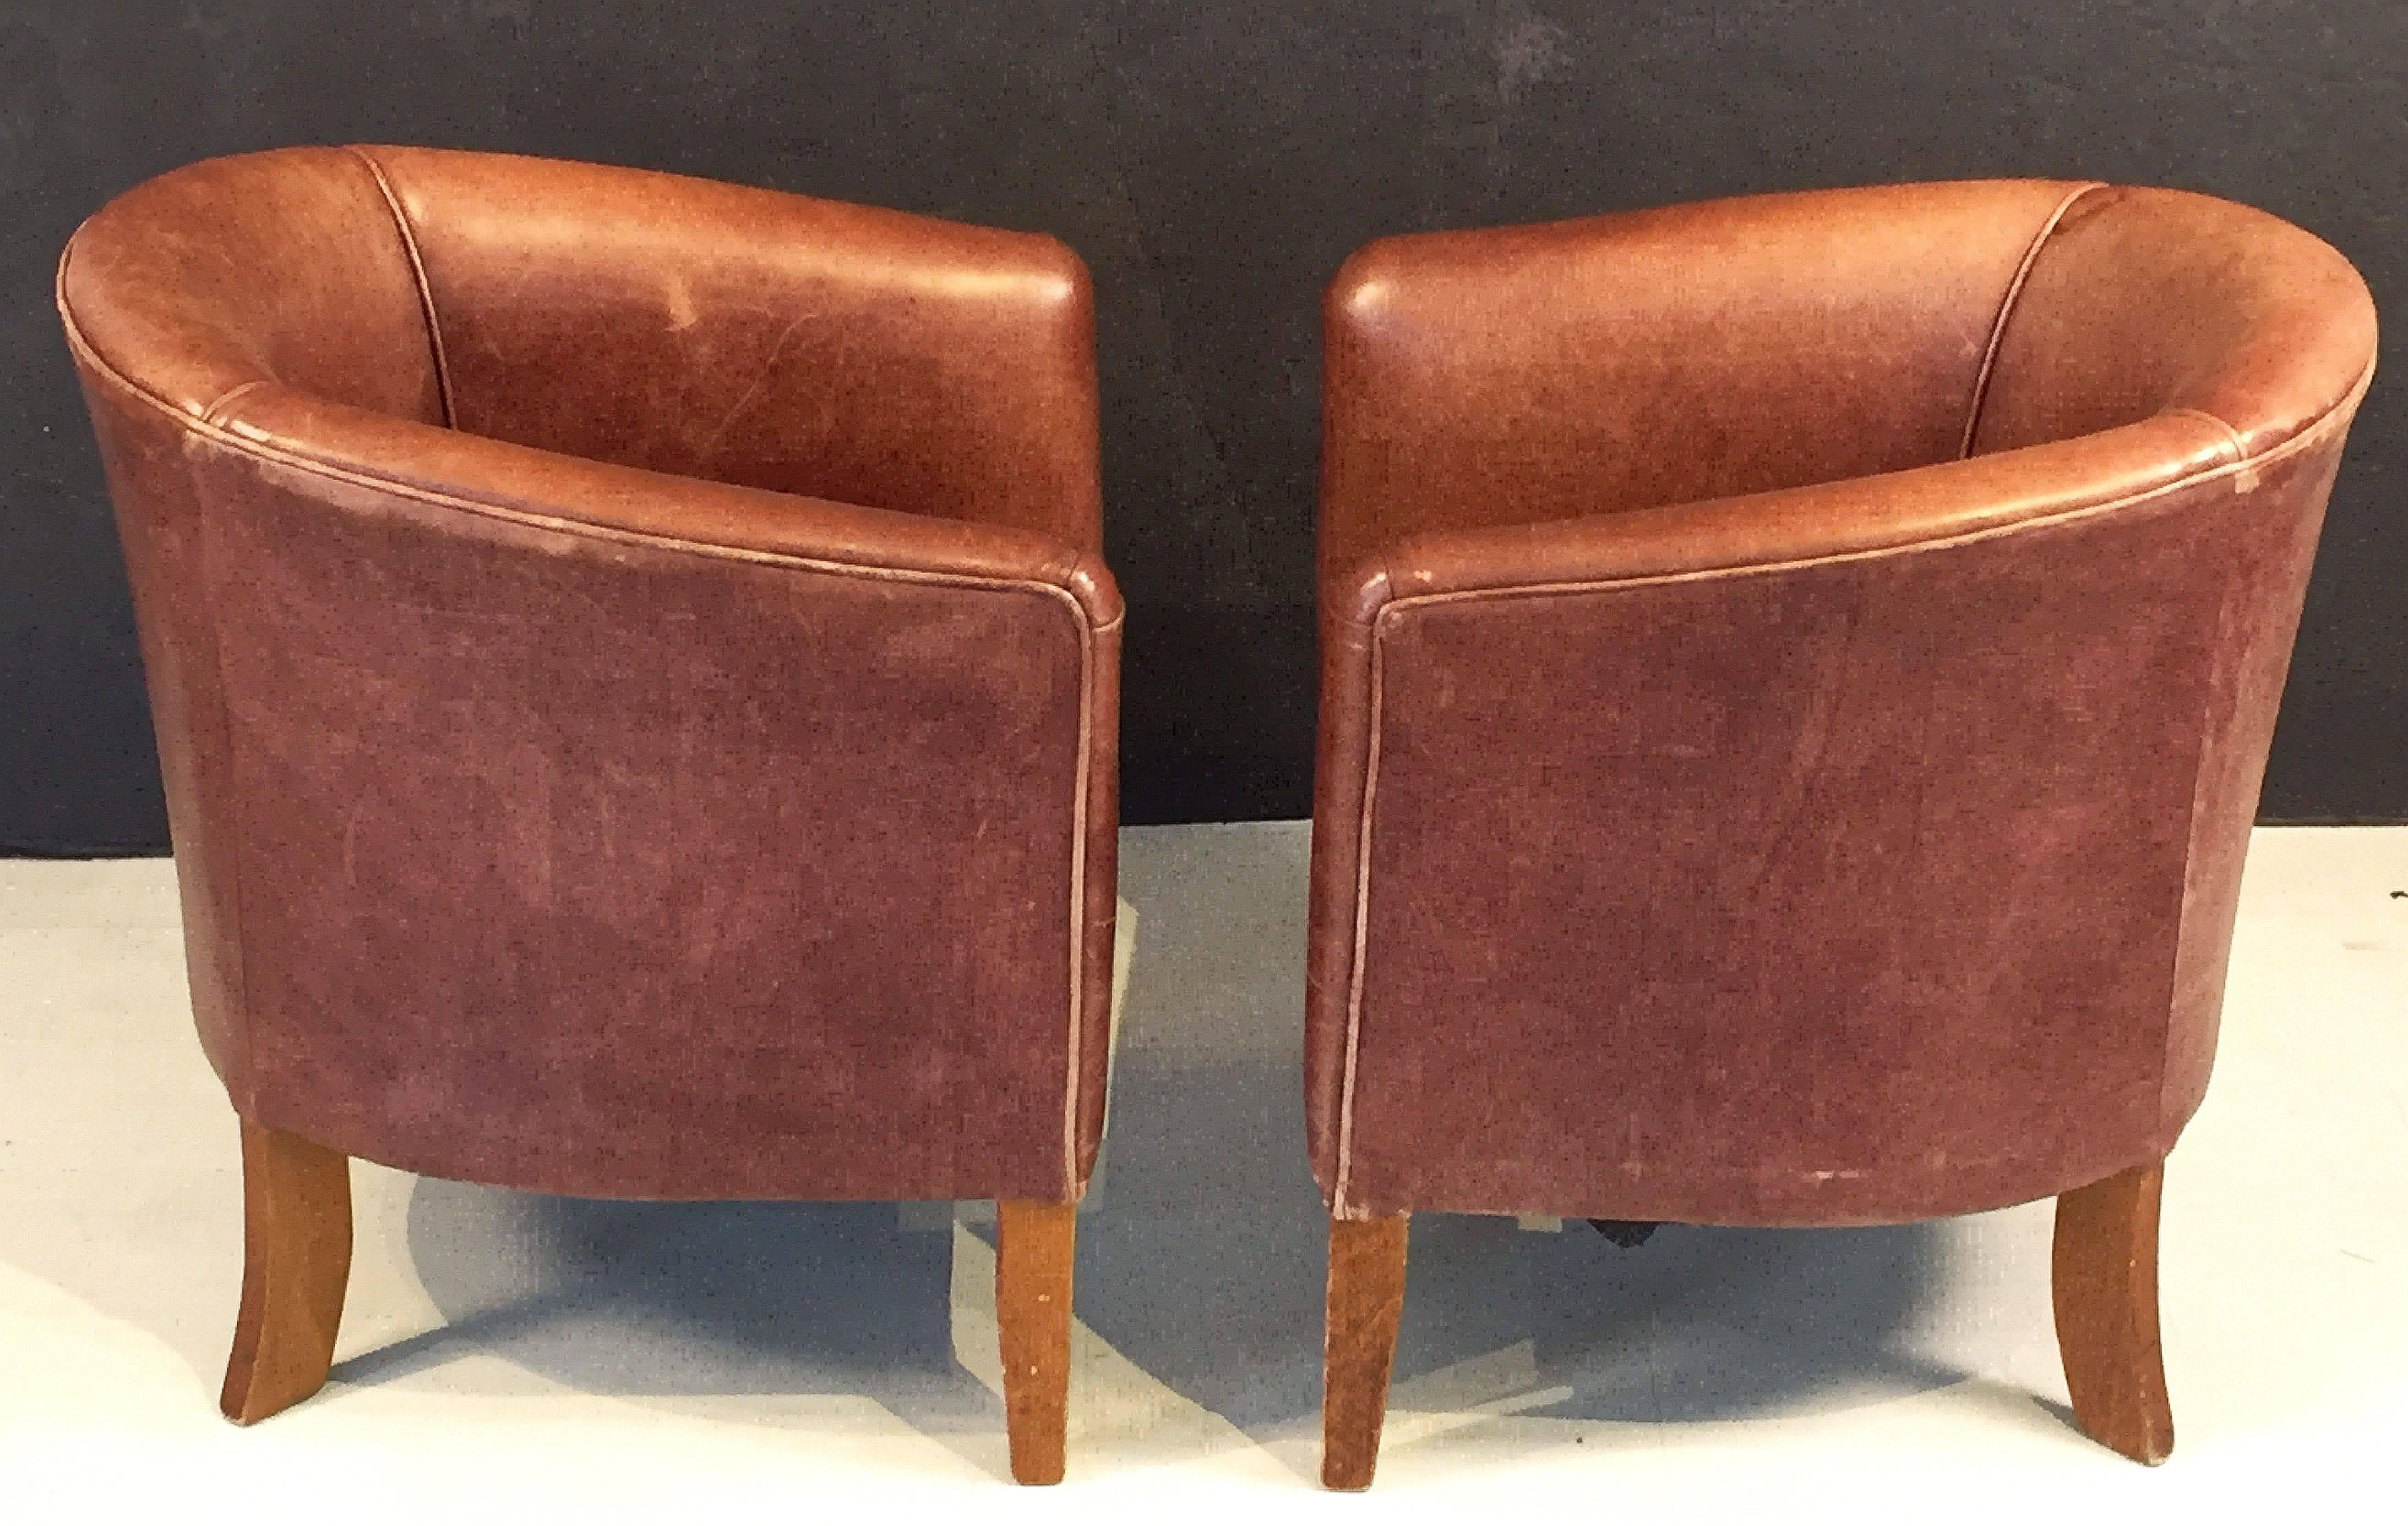 Upholstery Pair of Italian Leather Lounge Chairs